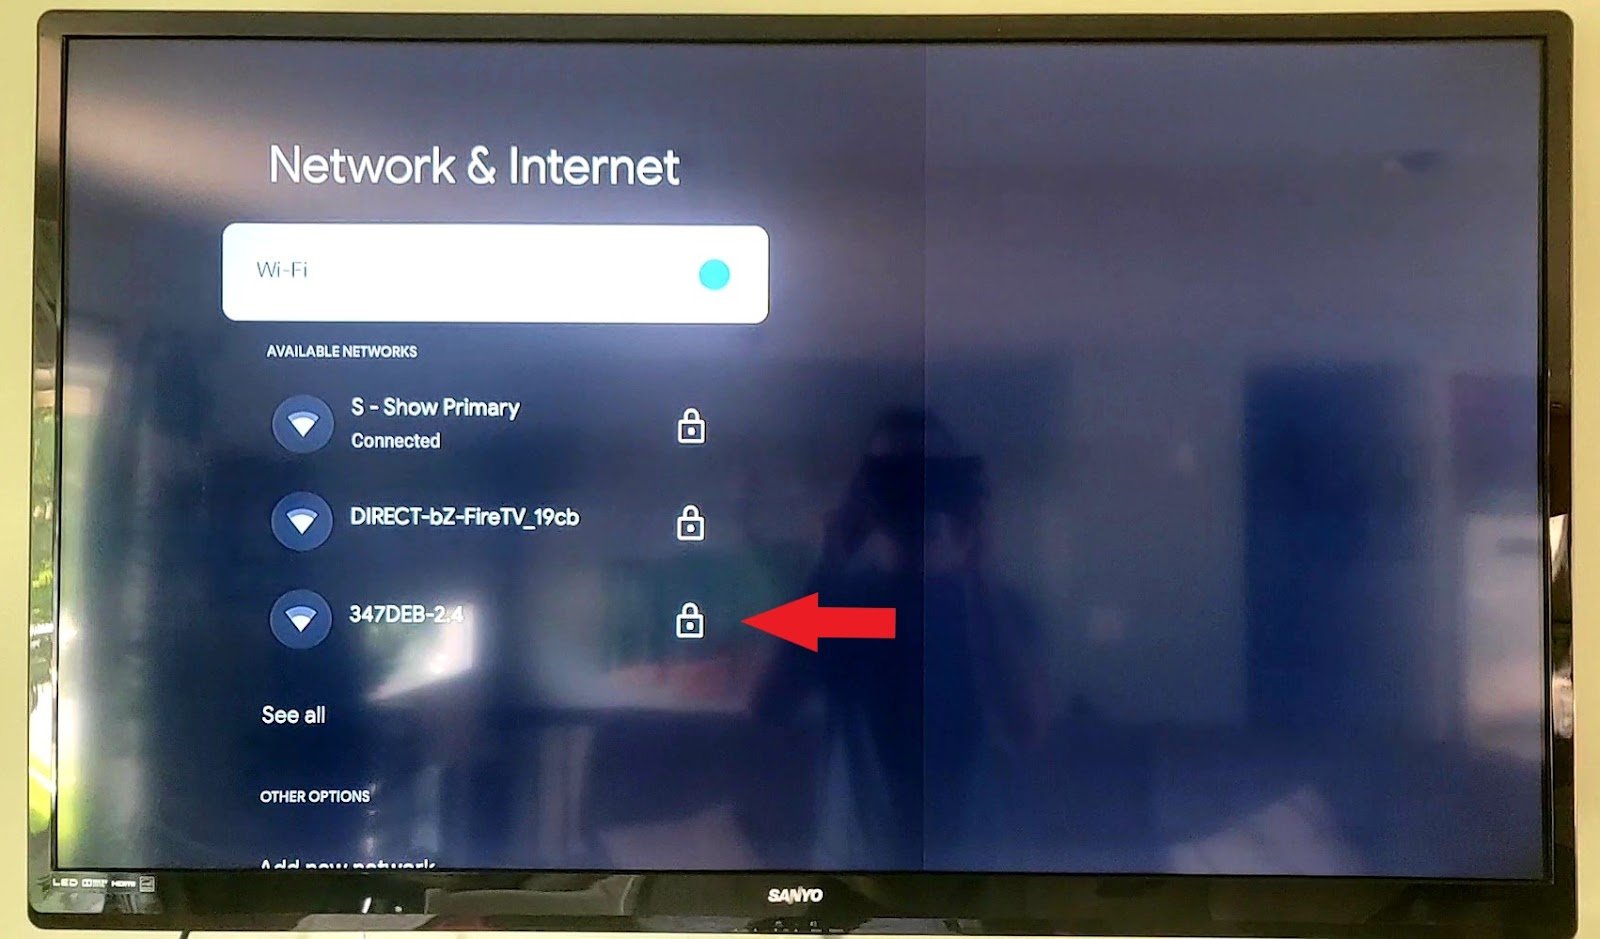 Selecting your current network will allow you to disconnect to reset your Chromecast's WiFi.  Or, you can select another network to change WiFi networks.